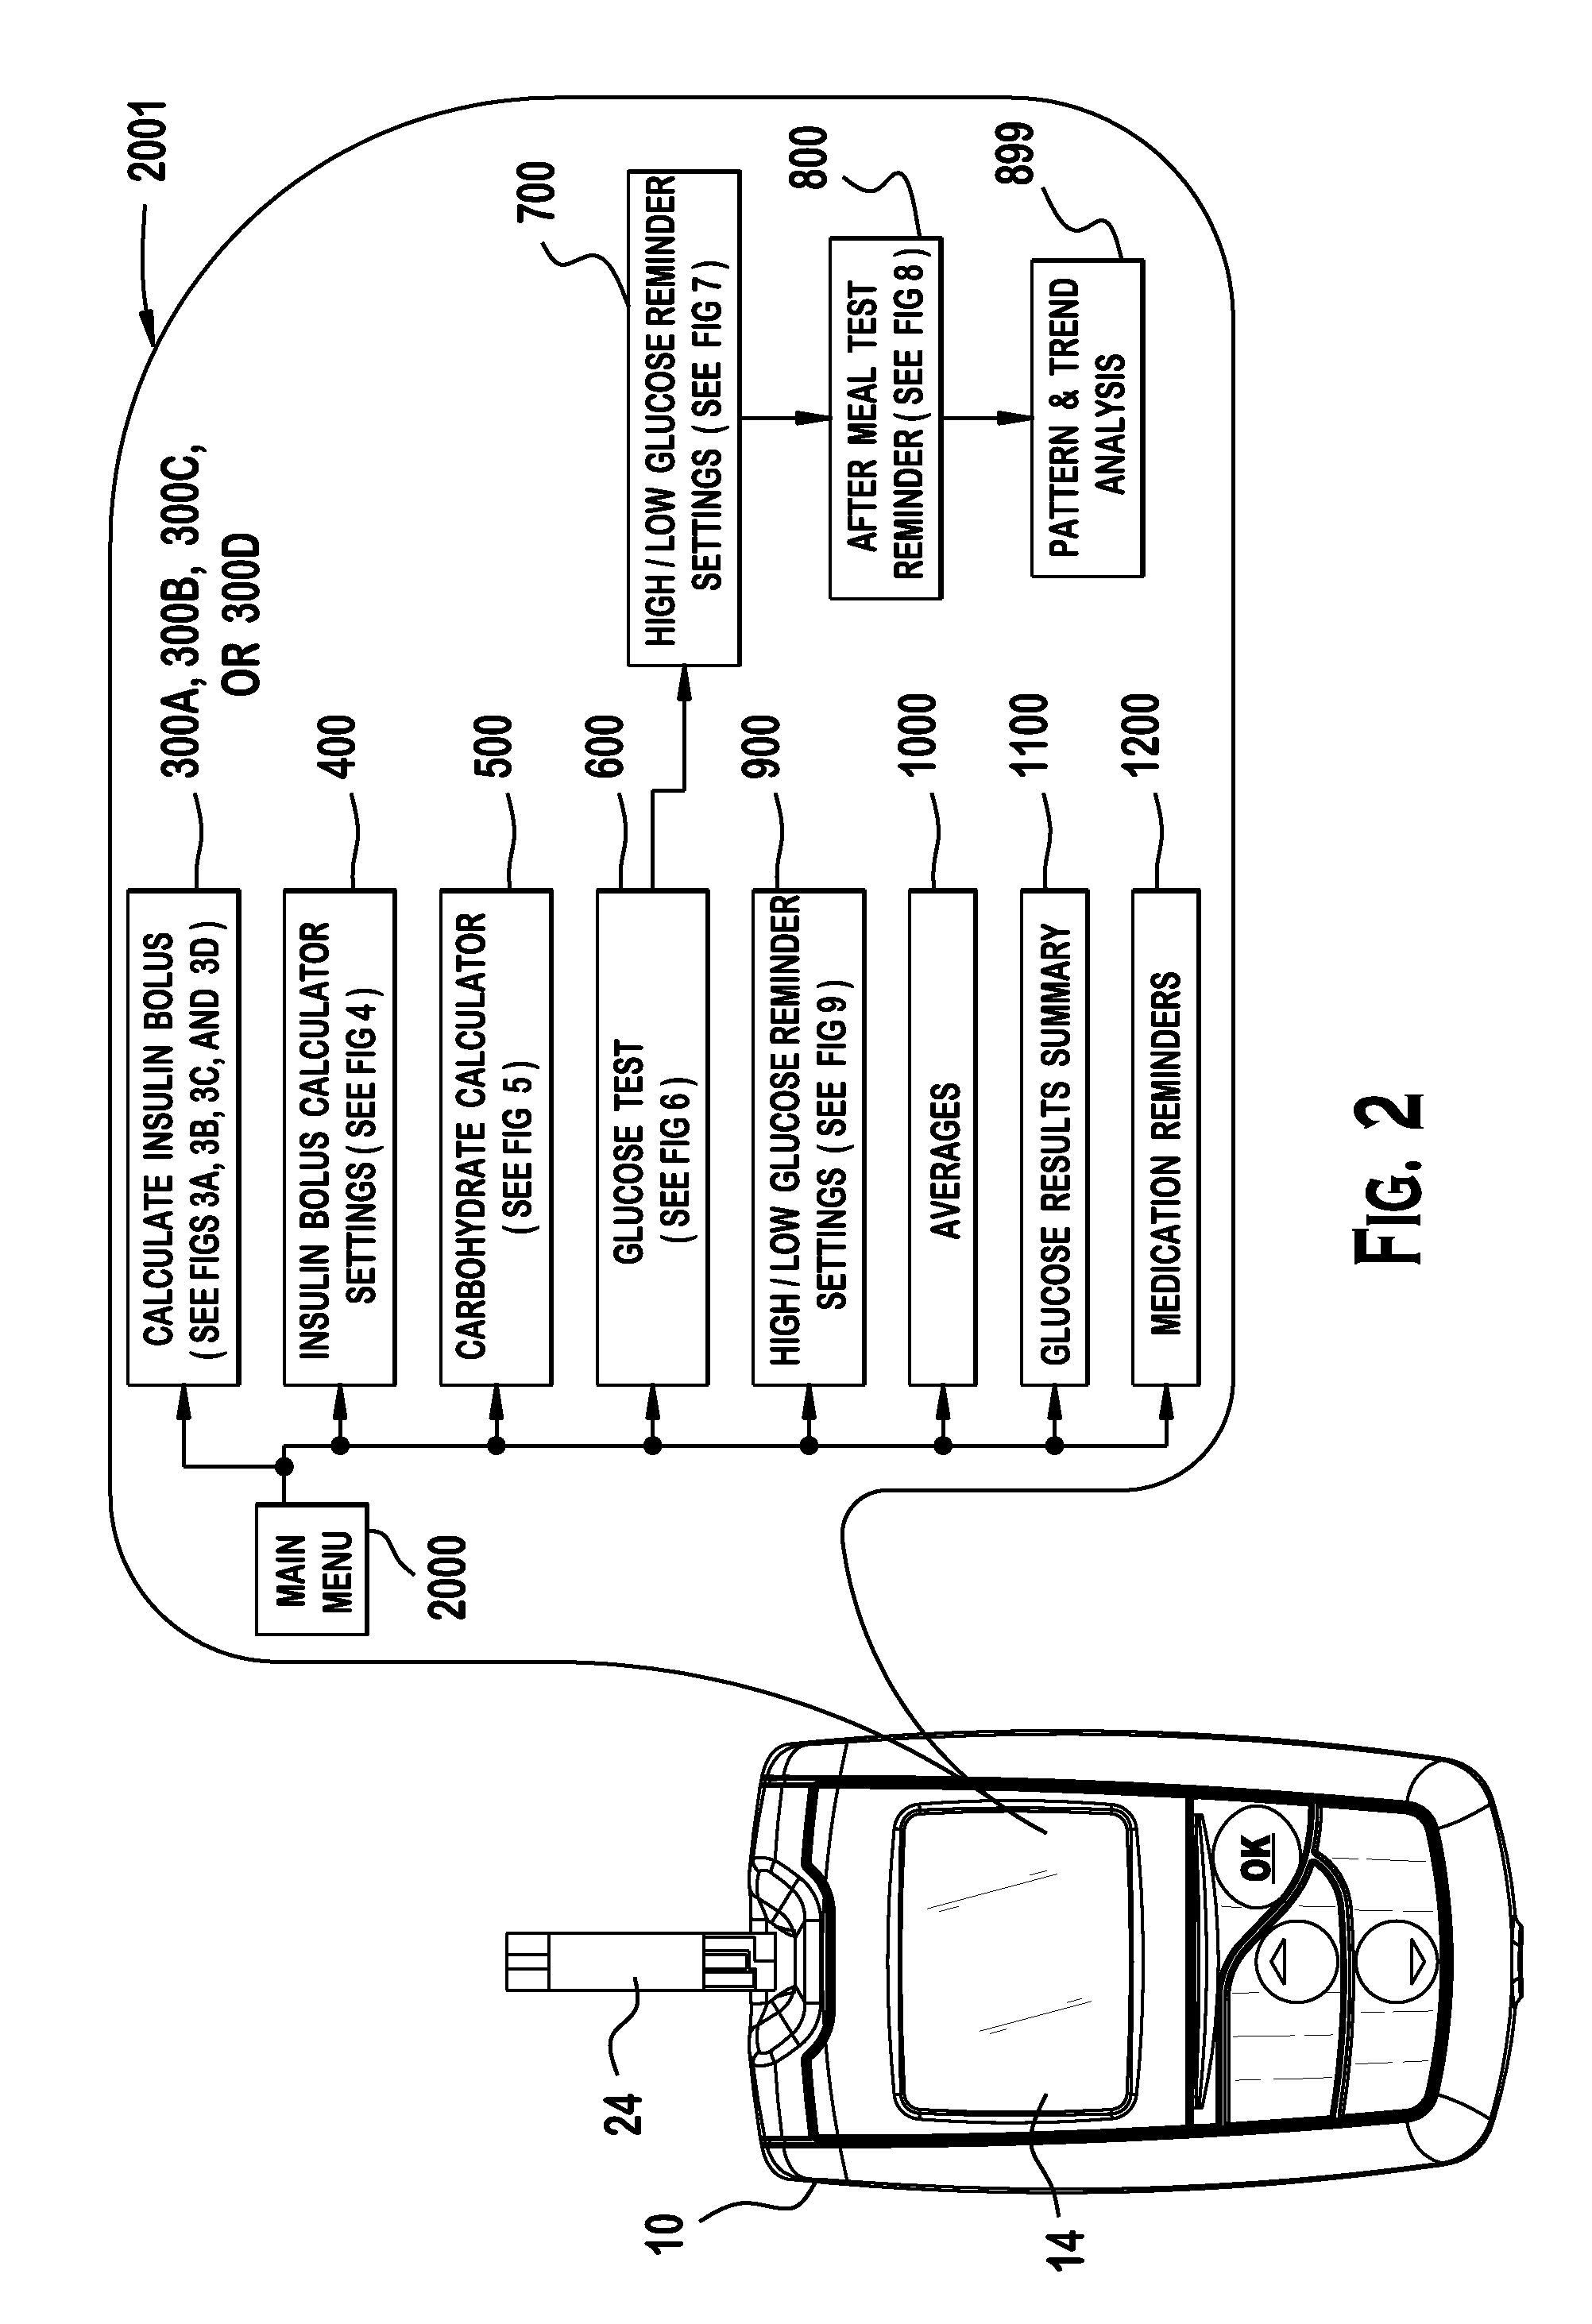 Analyte testing method and device for diabetes management